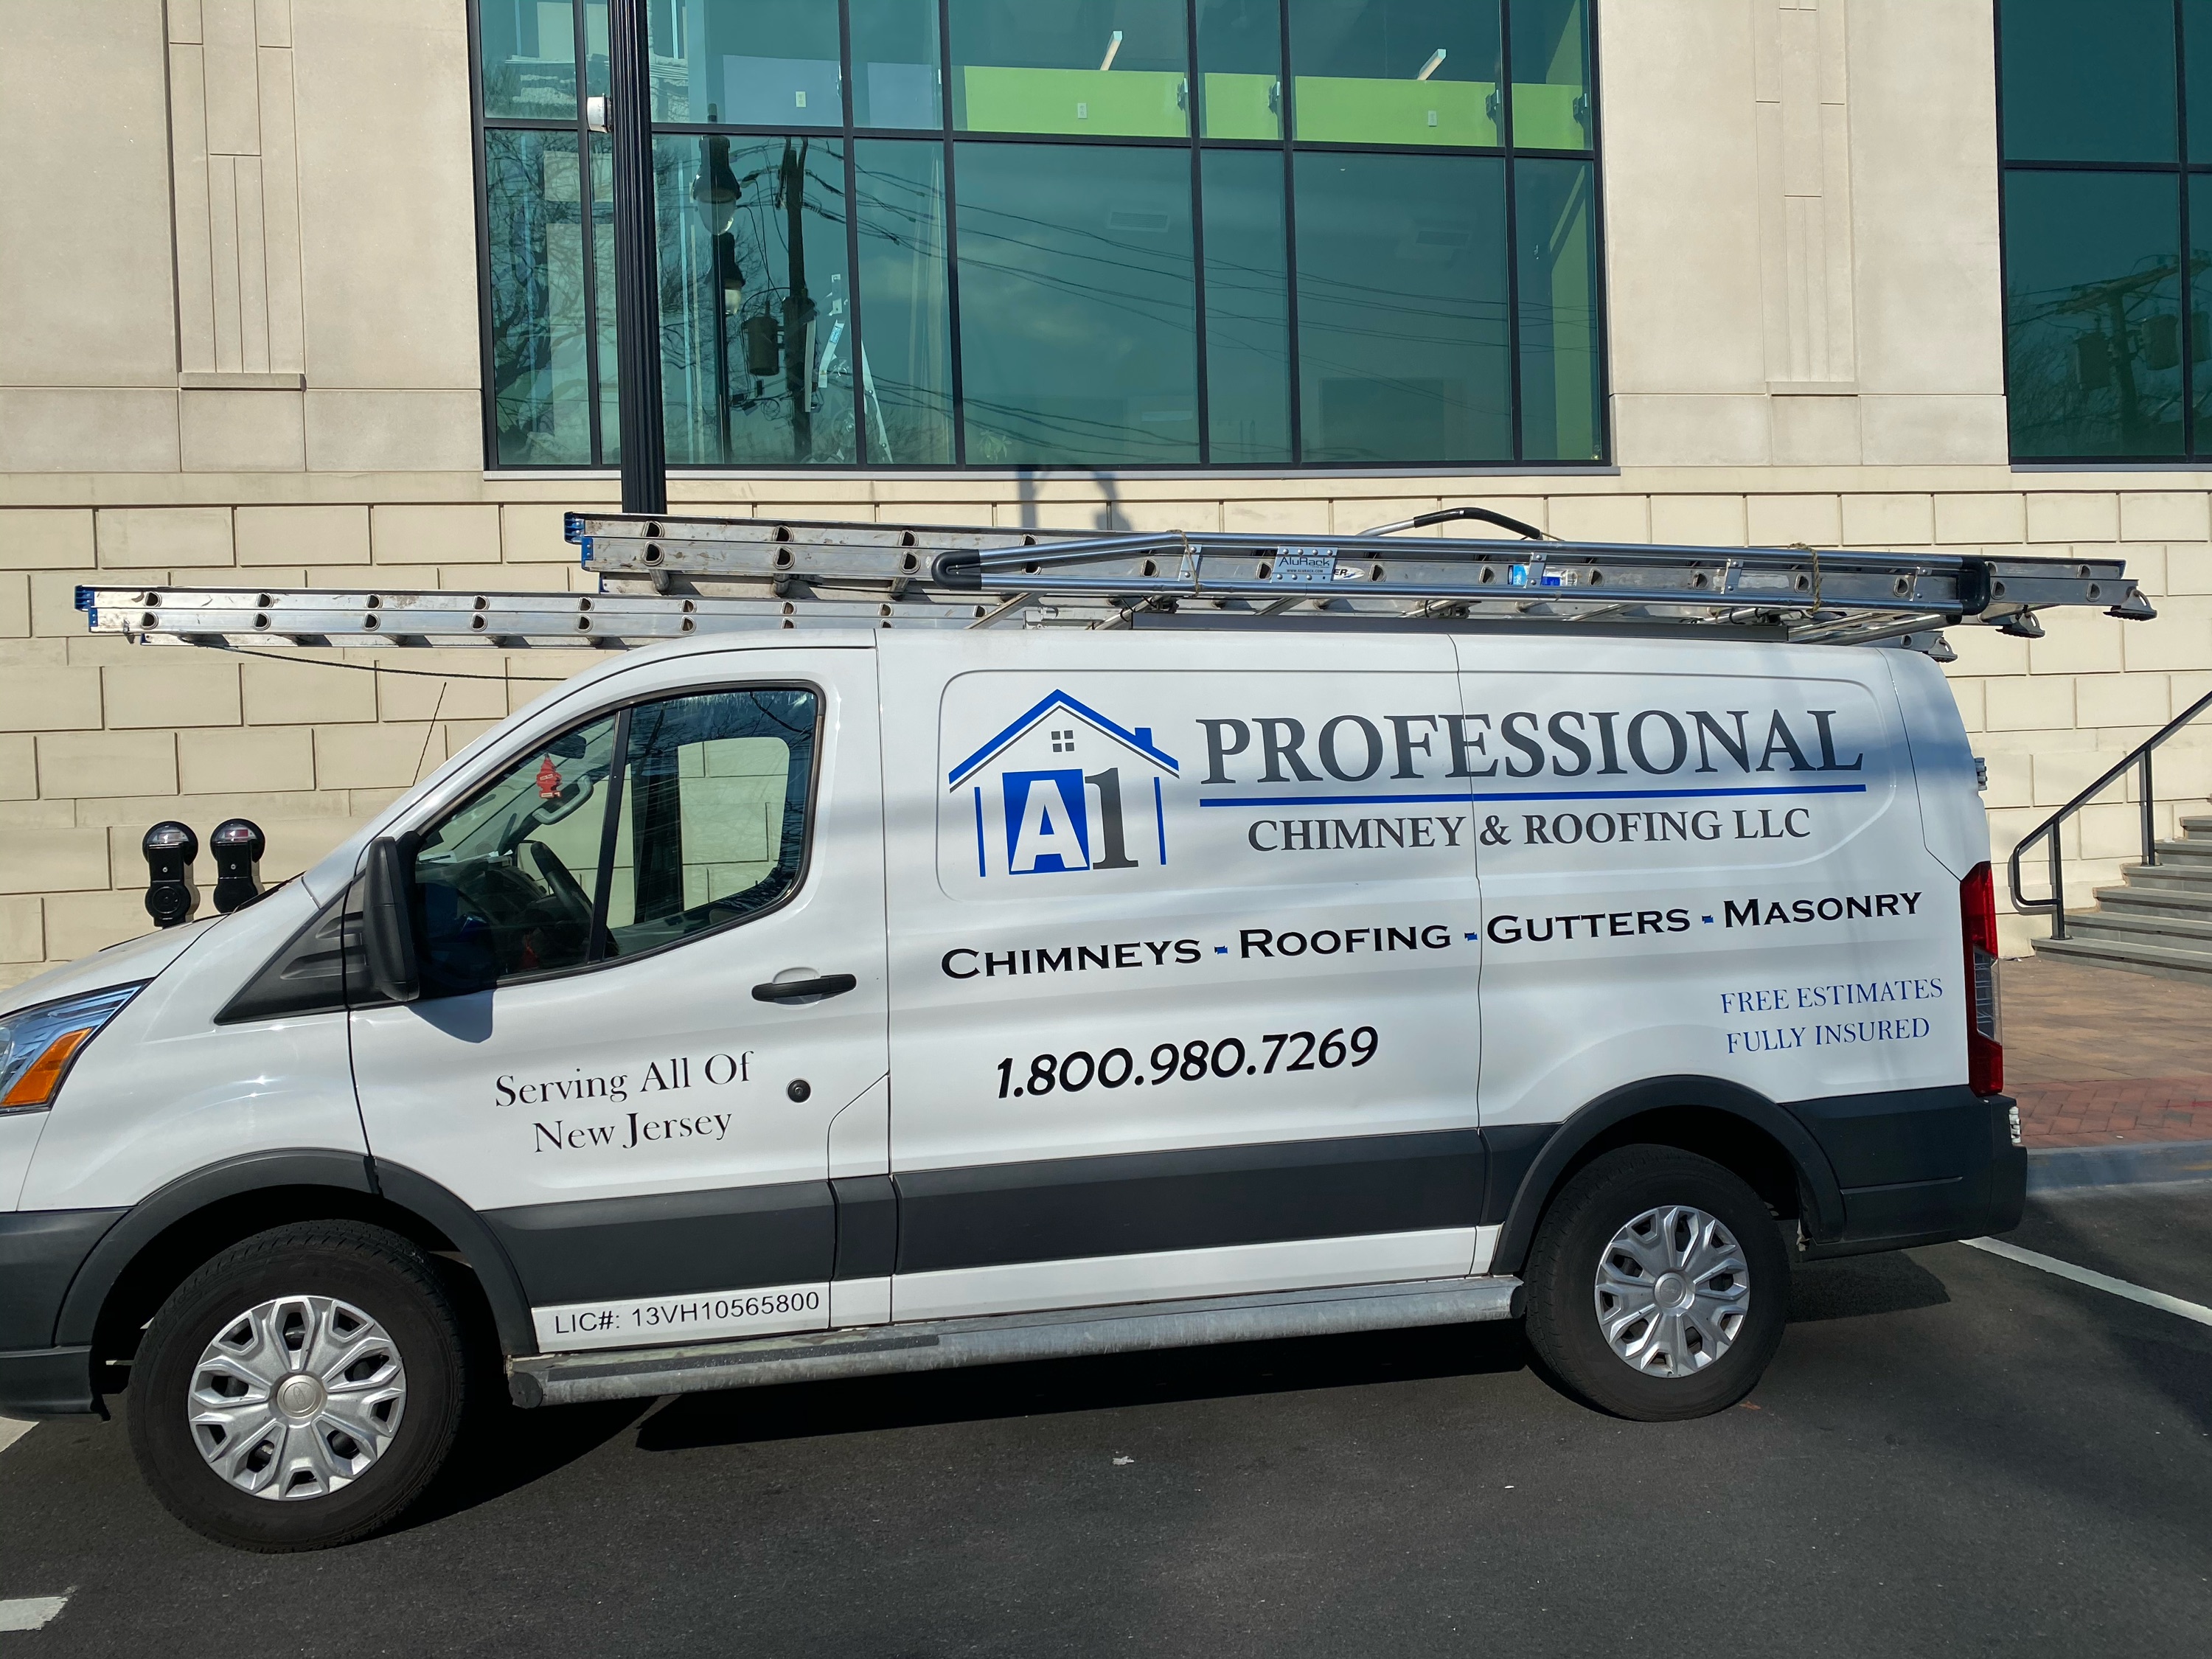 A1 Professional Chimney and Roofing, LLC Logo